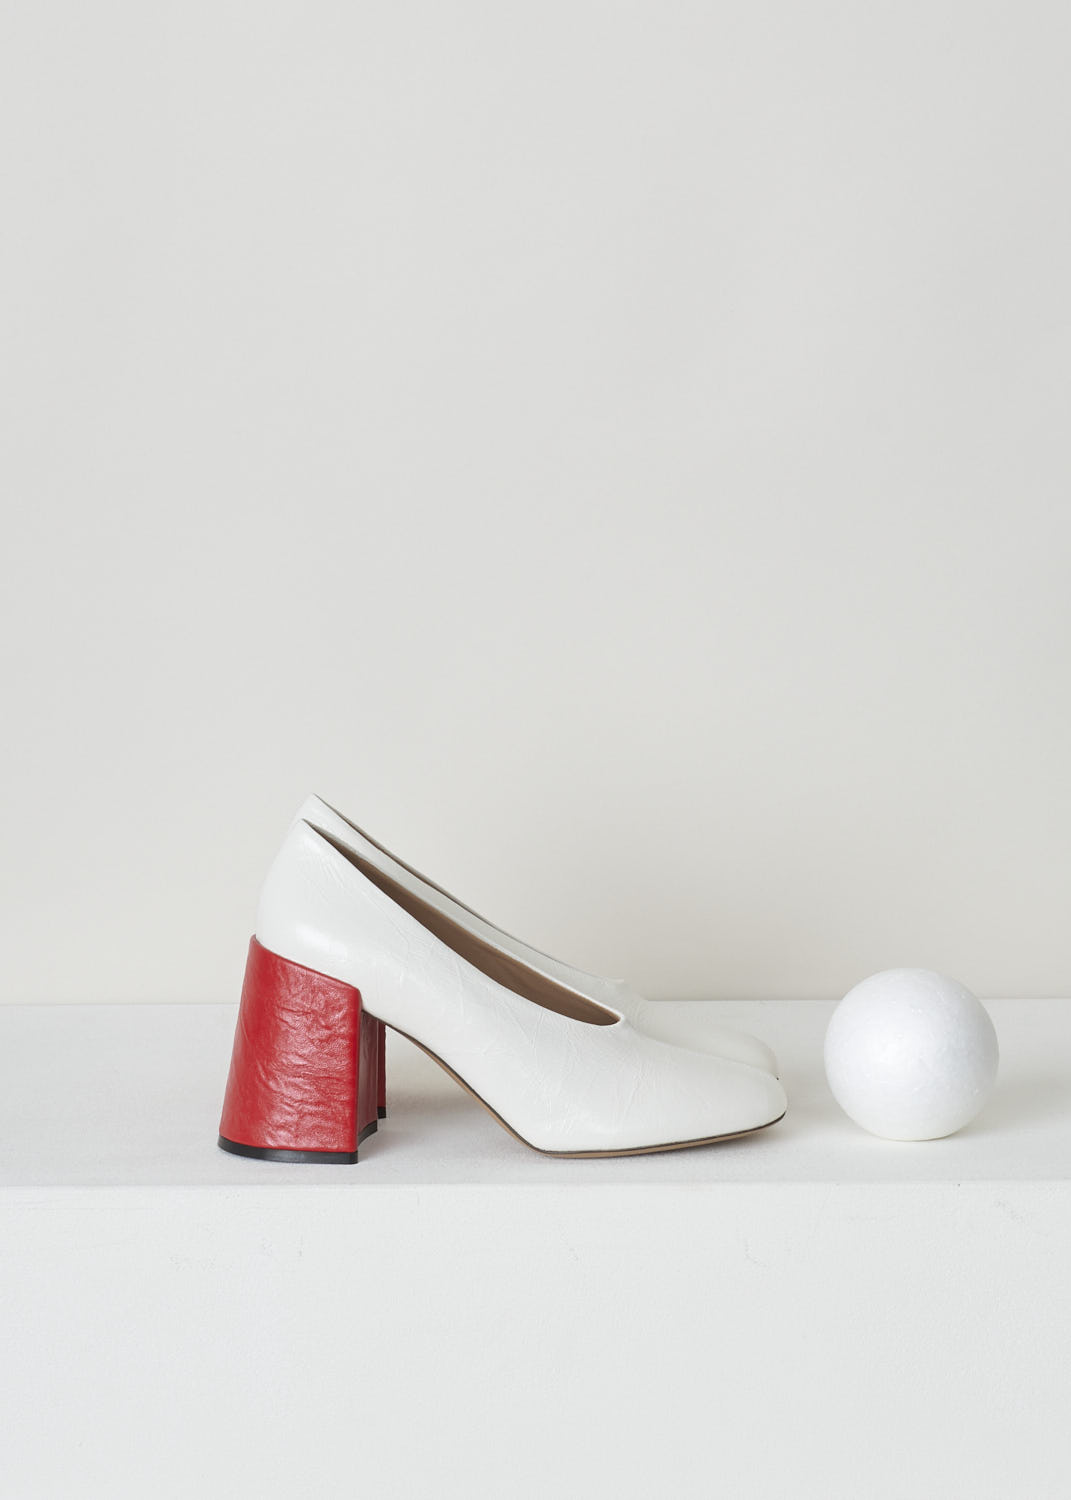 MARNI, WHITE PUMP WITH CONTRASTING RED HEEL, PUMS001609_LV801_00W01, White, Red, Side, These white pumps have a round nose with a decorative seam and a contrasting red block heel. What sets these pumps apart is the crinkled finish throughout the shoe.

Heel height: 9.5 cm / 3.7 inch
